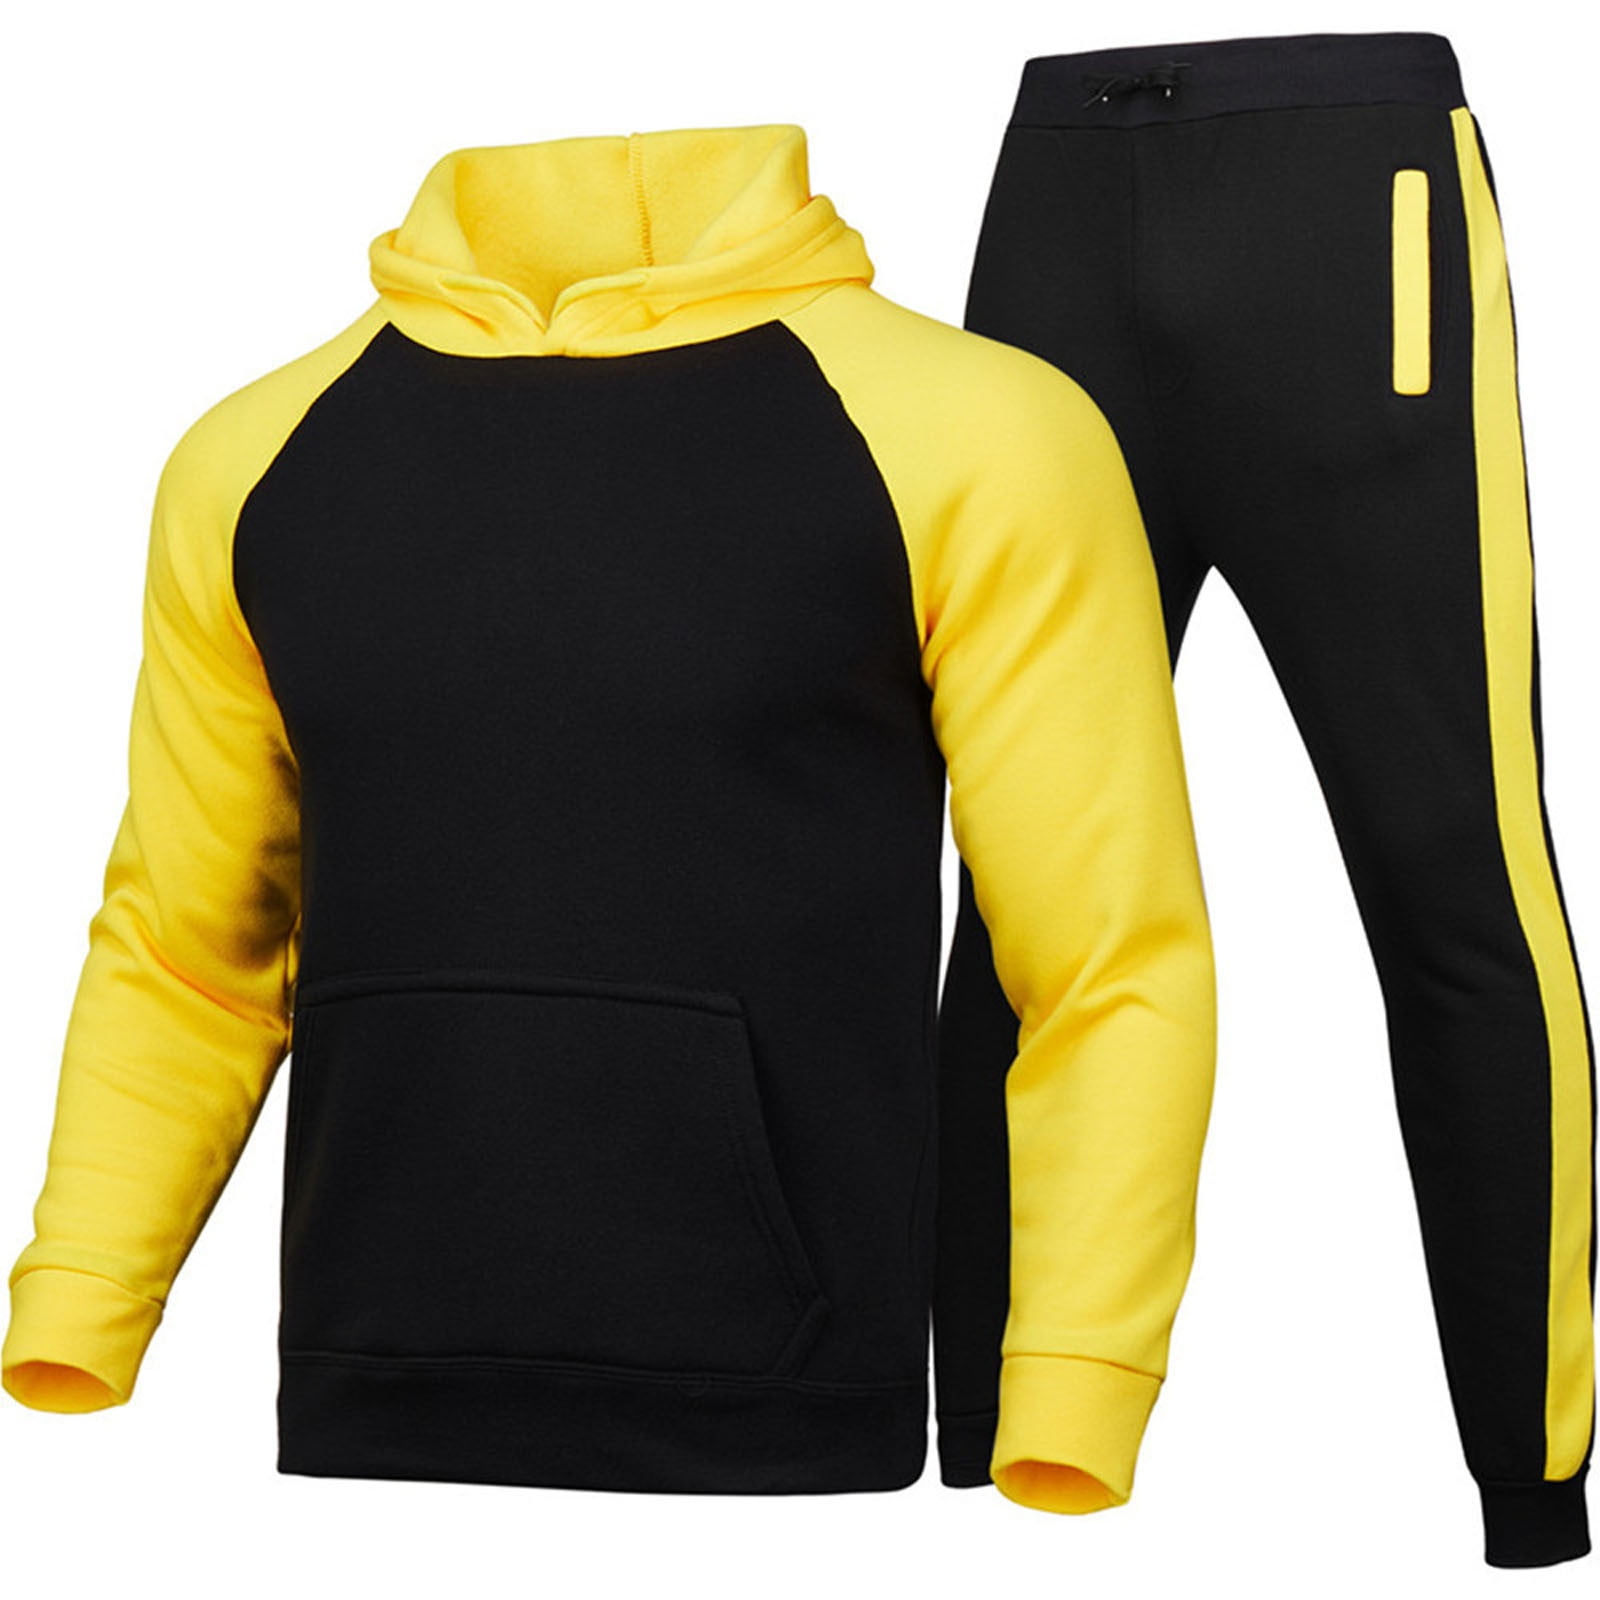 AOOCHASLIY Mens Sweat Suits Sets Clearance Jogging Suits Long Sleeve ...